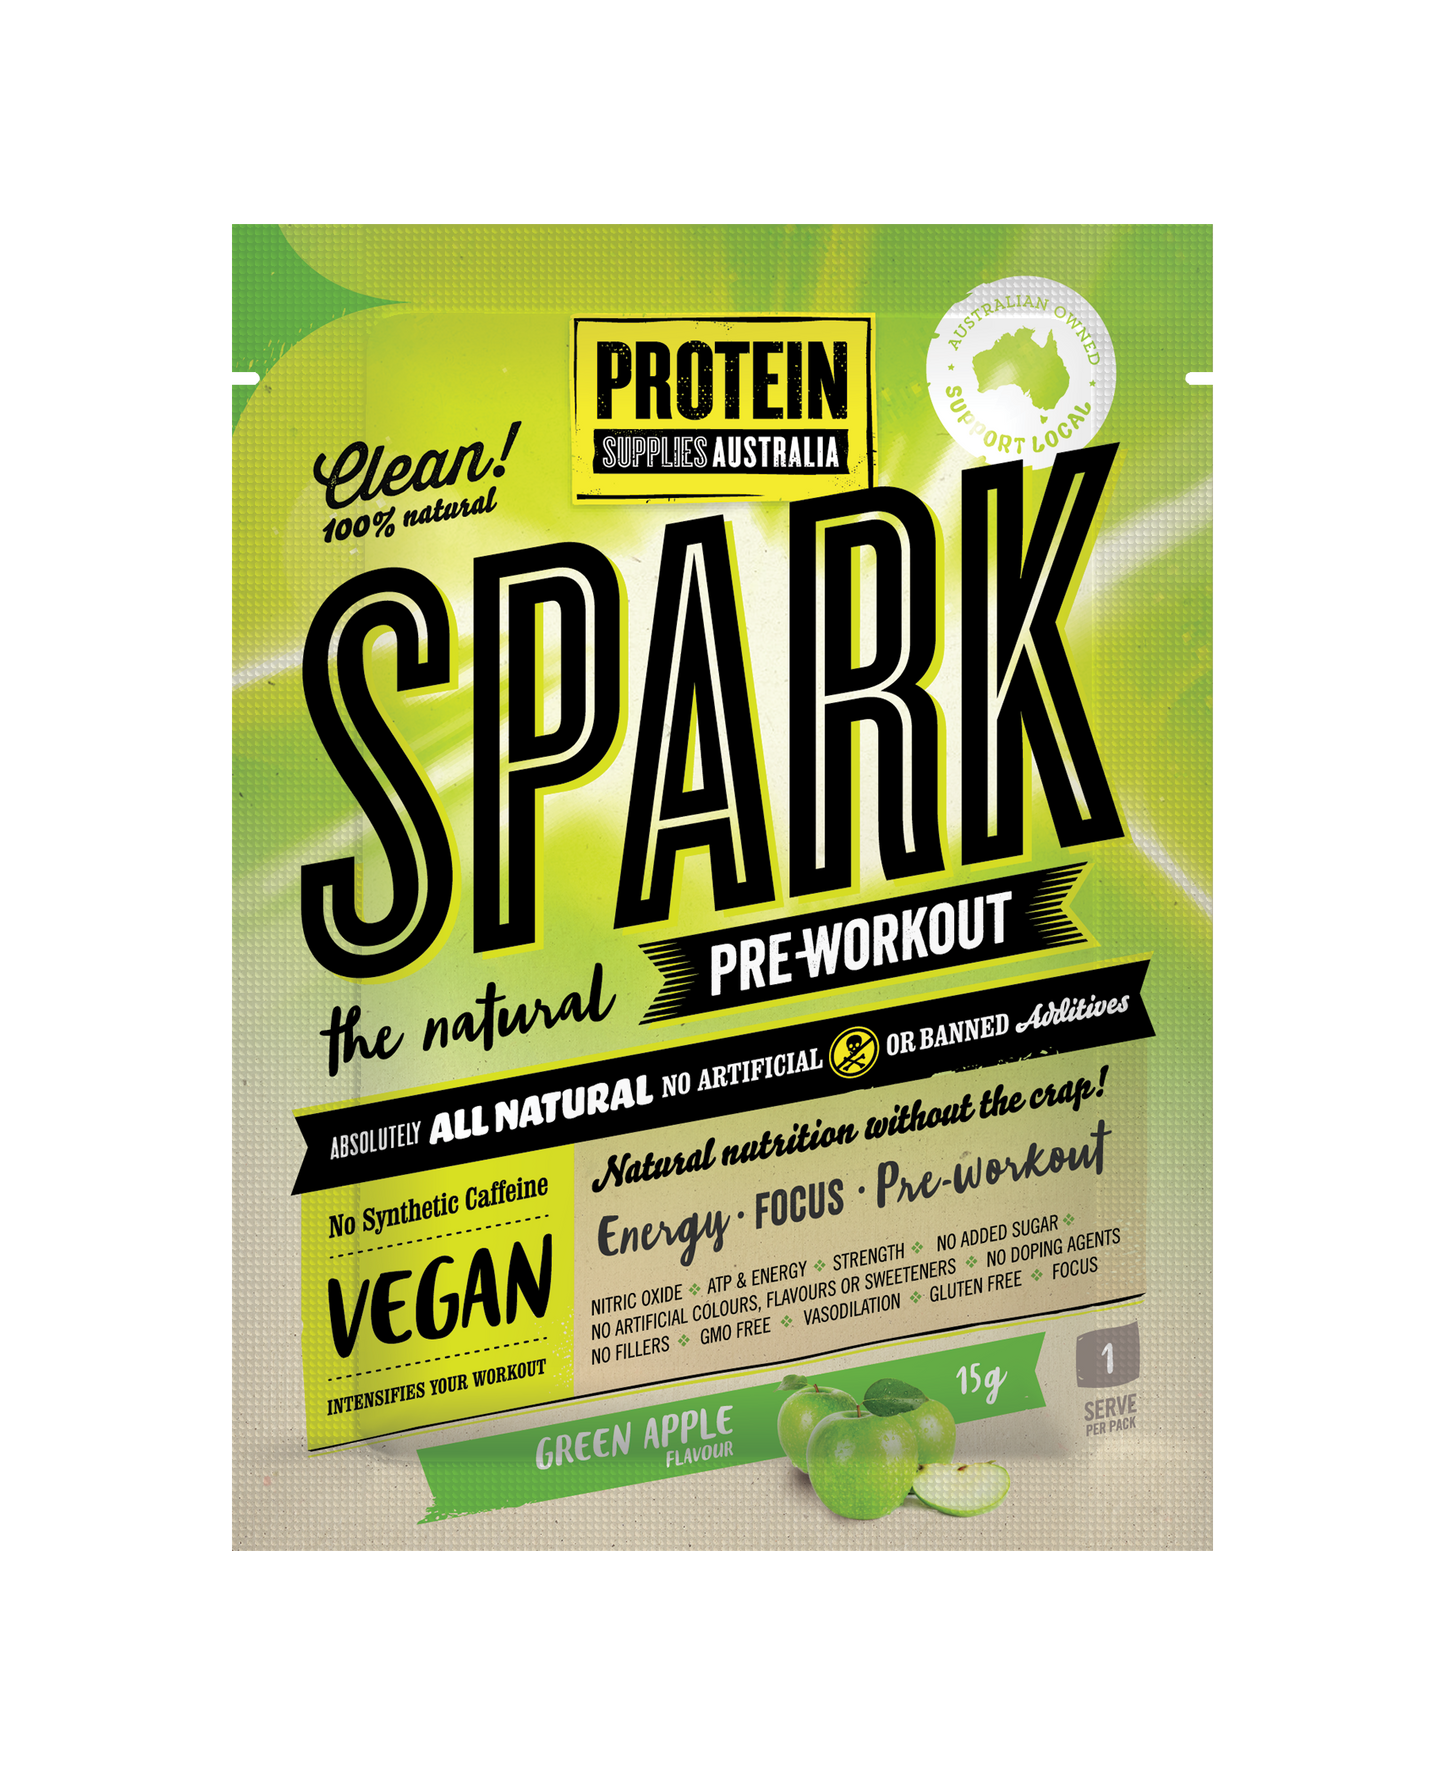 Protein Supplies Australia Spark (All Natural Pre-workout) 15g Or 250g, Green Apple Flavour